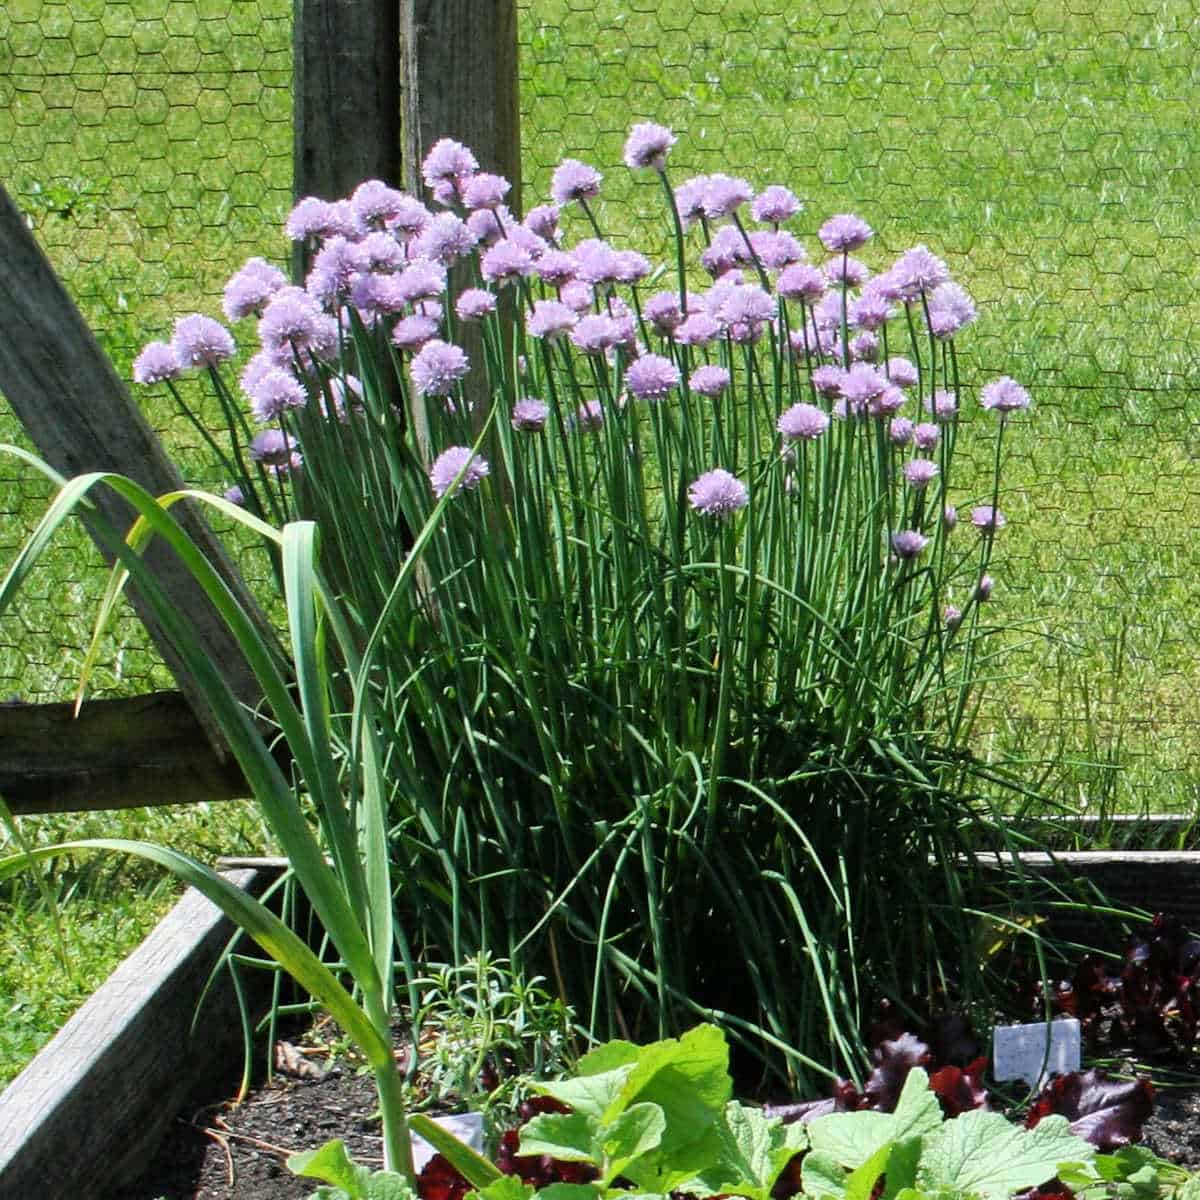 chives near a garden fence